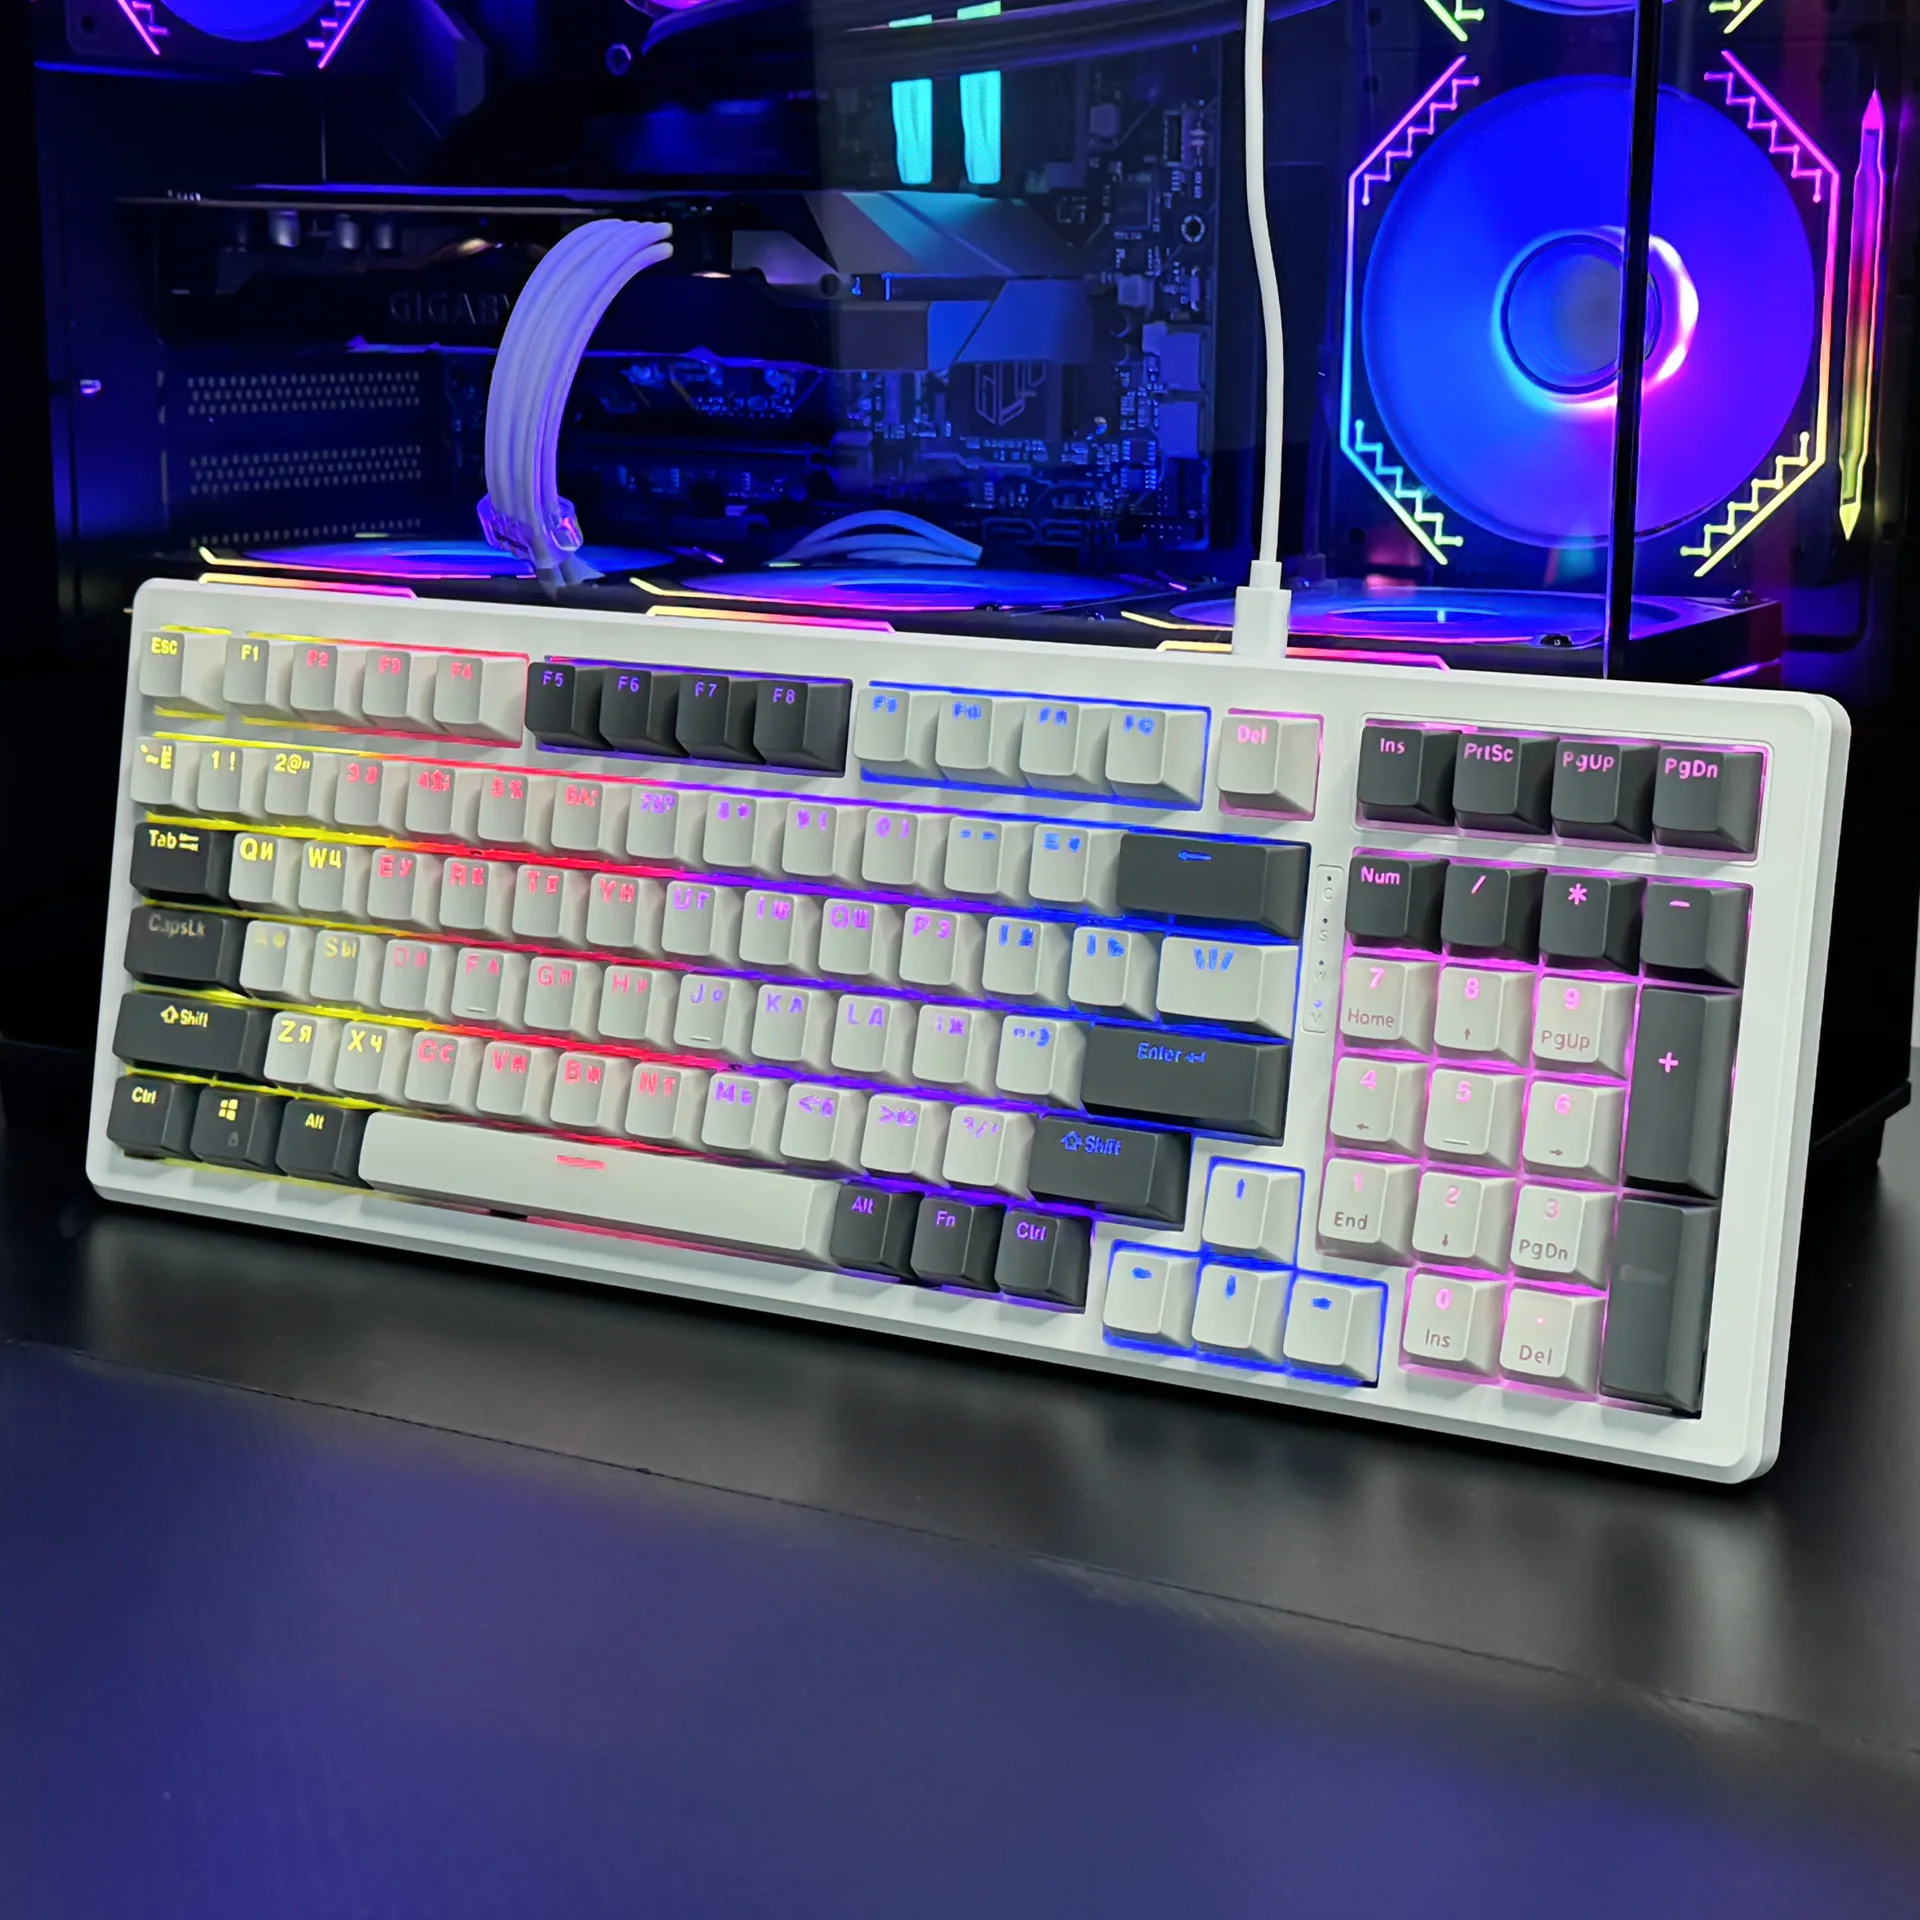 

K99 Mechanical Gaming Keyboard Blue Red Switch 98 Keys USB Wired Gamer Russian for Computer Laptop клавиатура механическая